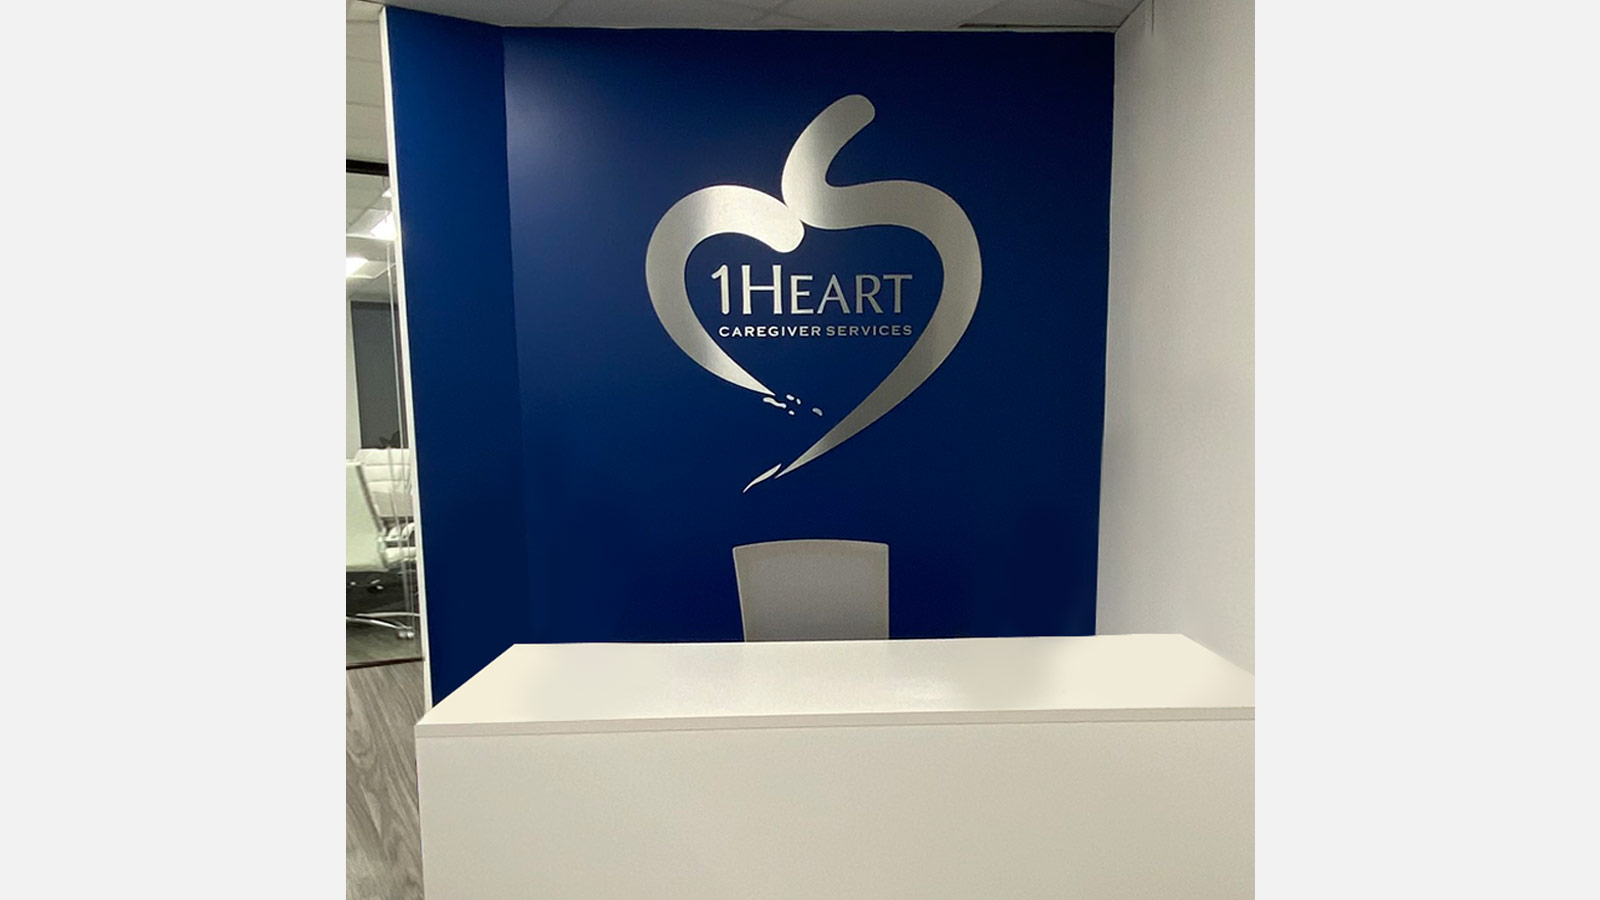 1Heart Caregiver Services lobby sign set up in the office